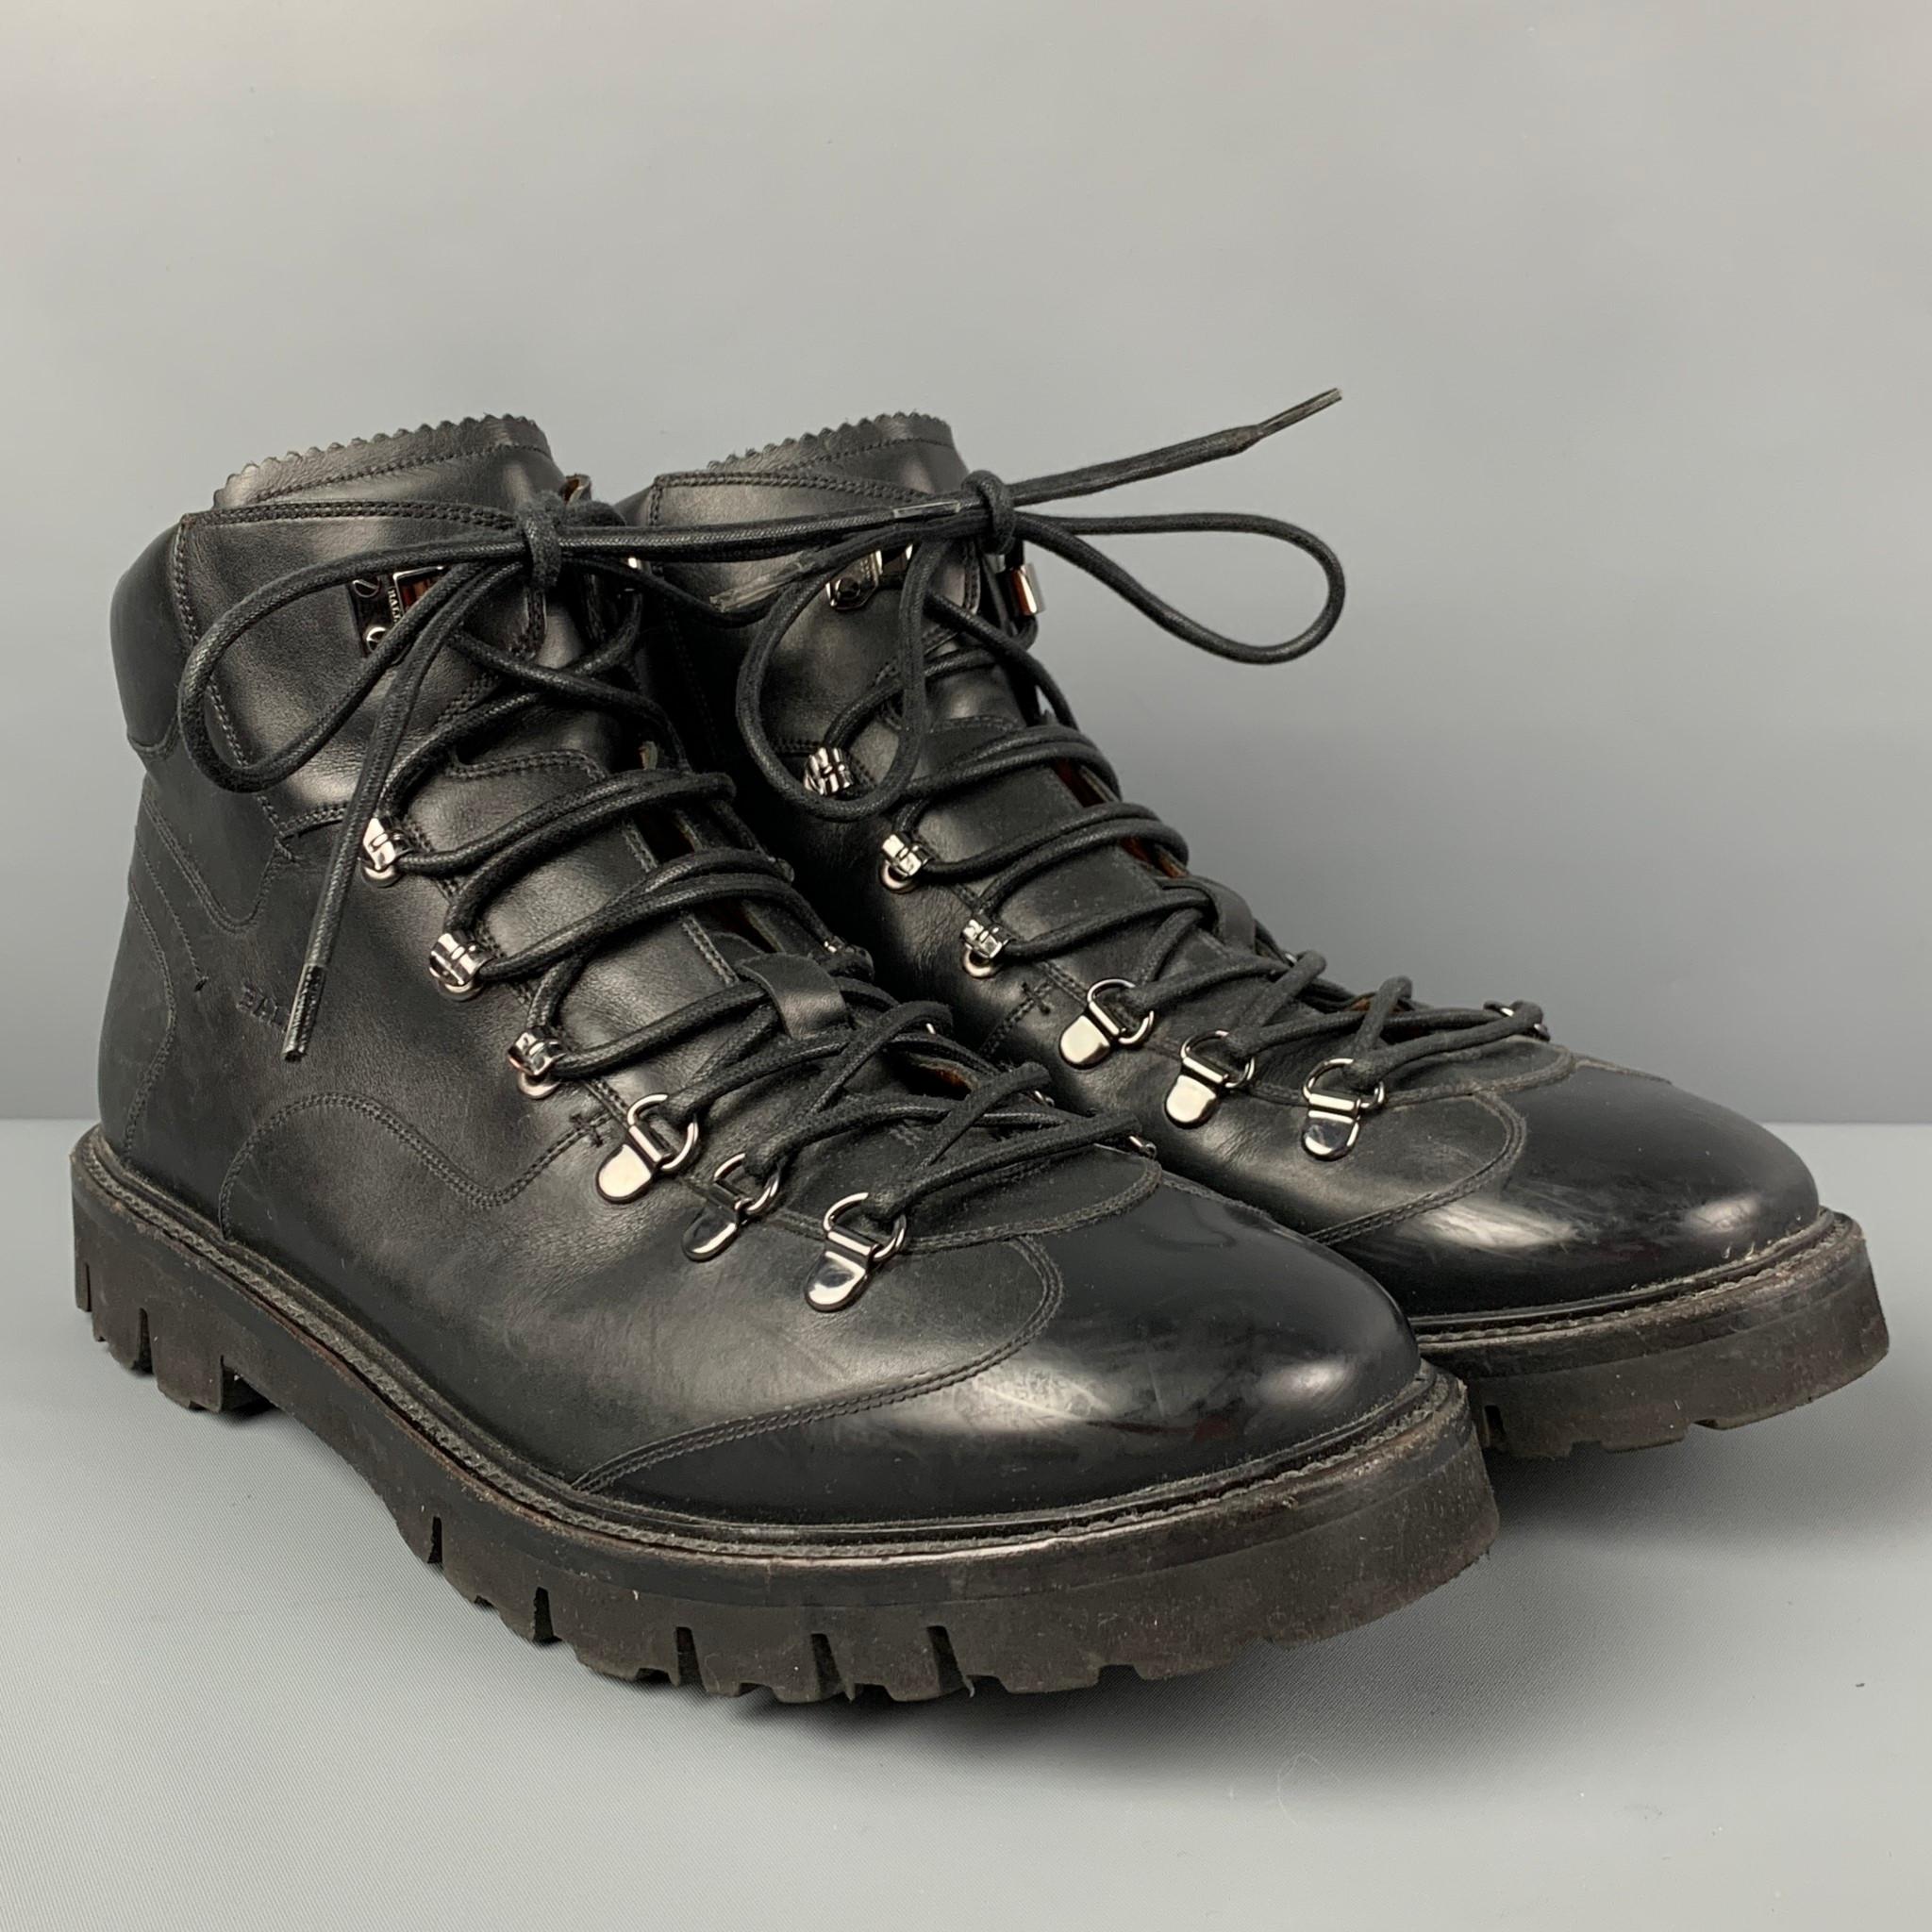 BALLY 'Charls' boots comes in a black leather featuring a hiking style, top stitching, and a lace up closure. Made in Switzerland.

Very Good Pre-Owned Condition.
Marked:EU 9 E / US 10 D

Measurements:

Length: 12.5 in.
Width: 4.25 in.
Height: 4.5